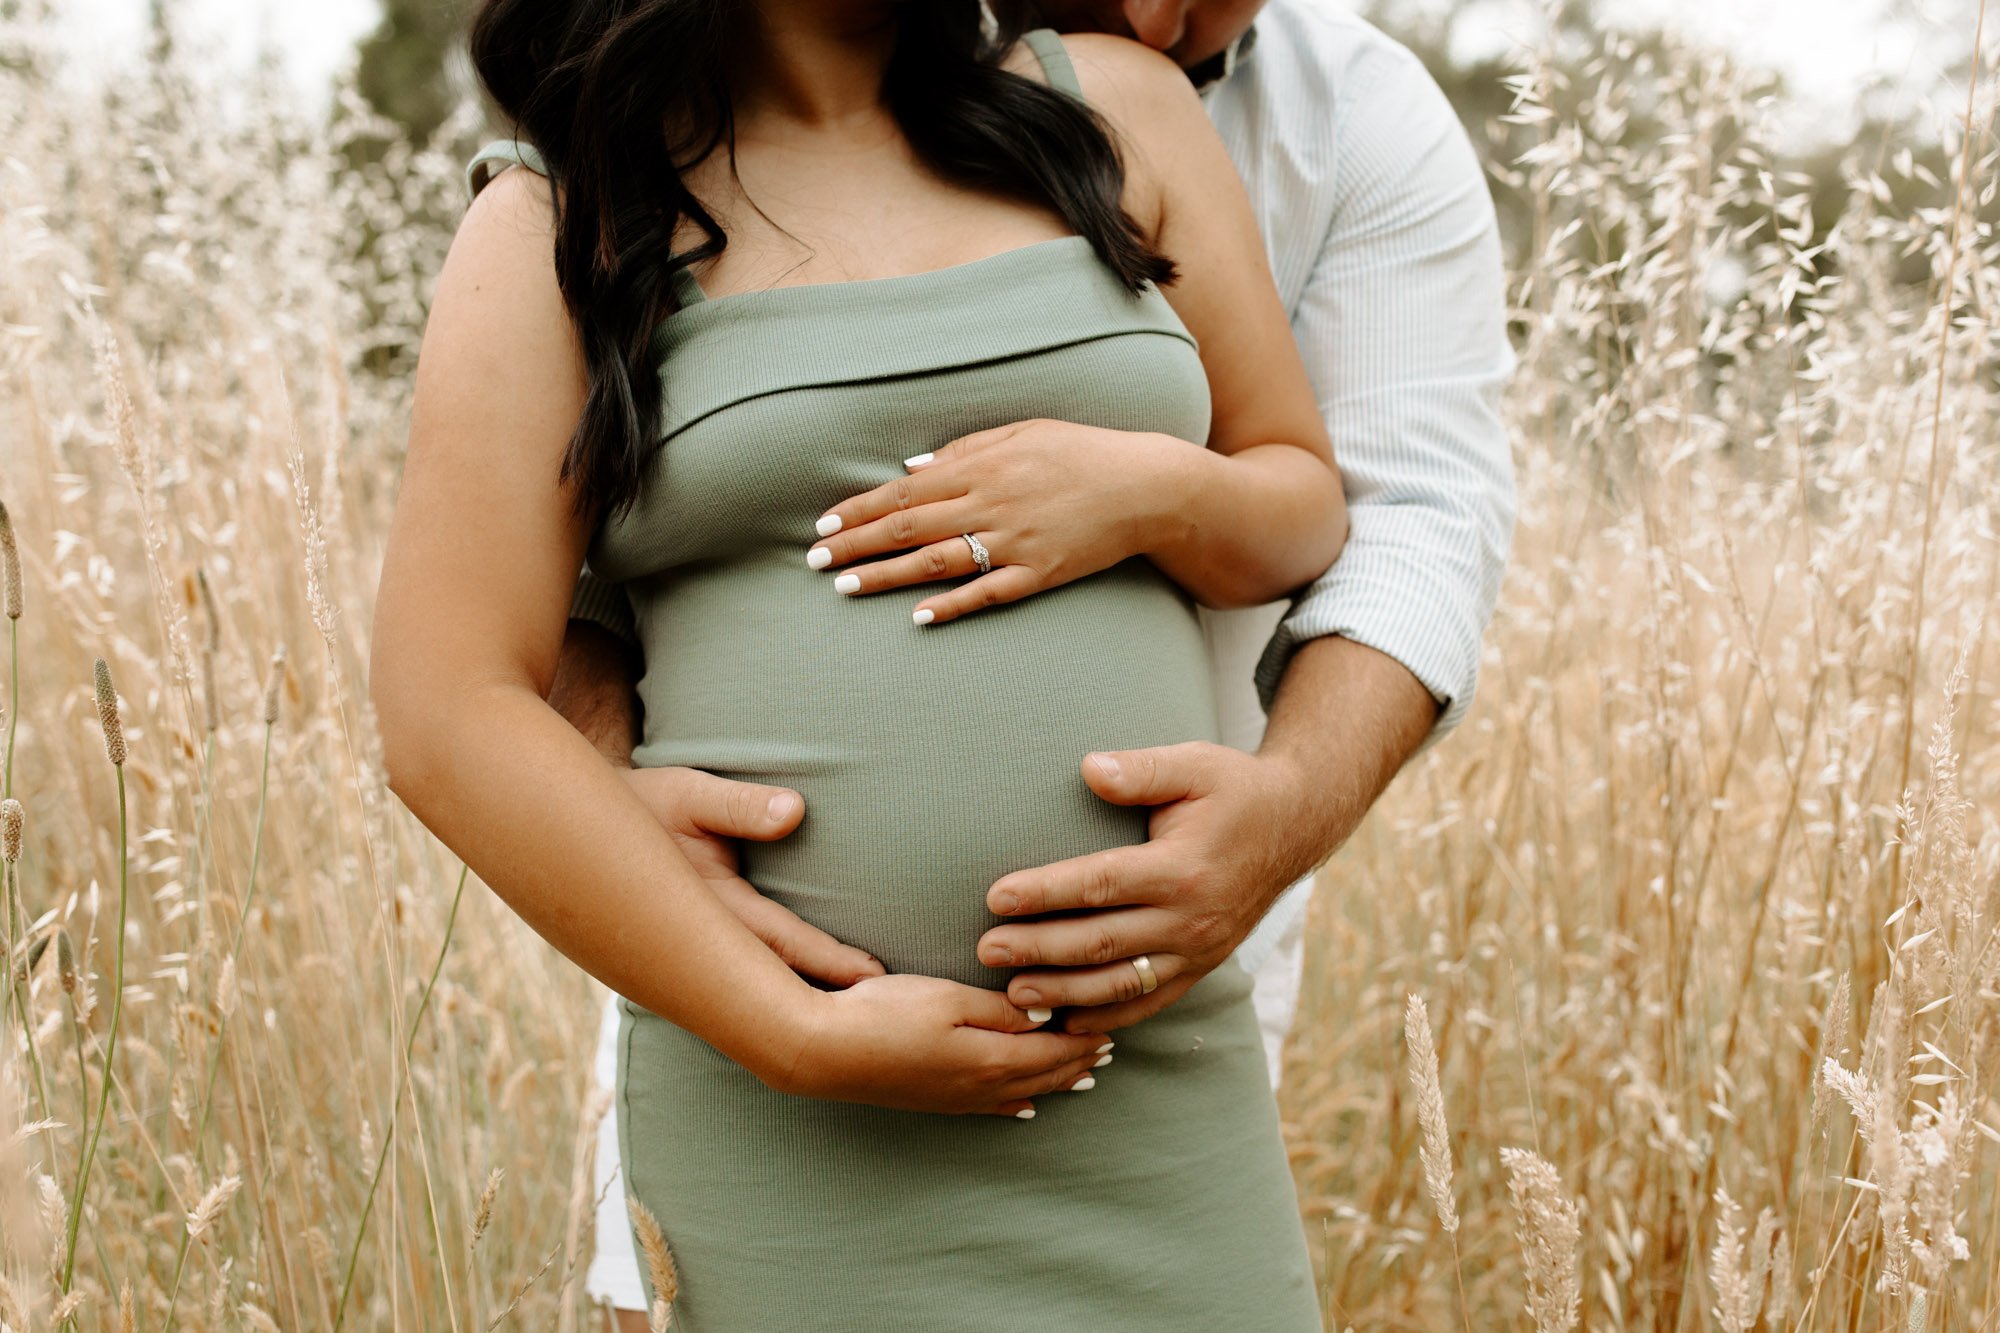 bub fam wedding weddings family families child children pregnancy newborn baby new baby pregnant adelaide south australia candid fun happy bright colourful married engagement engaged proposal propose ring_001.jpg